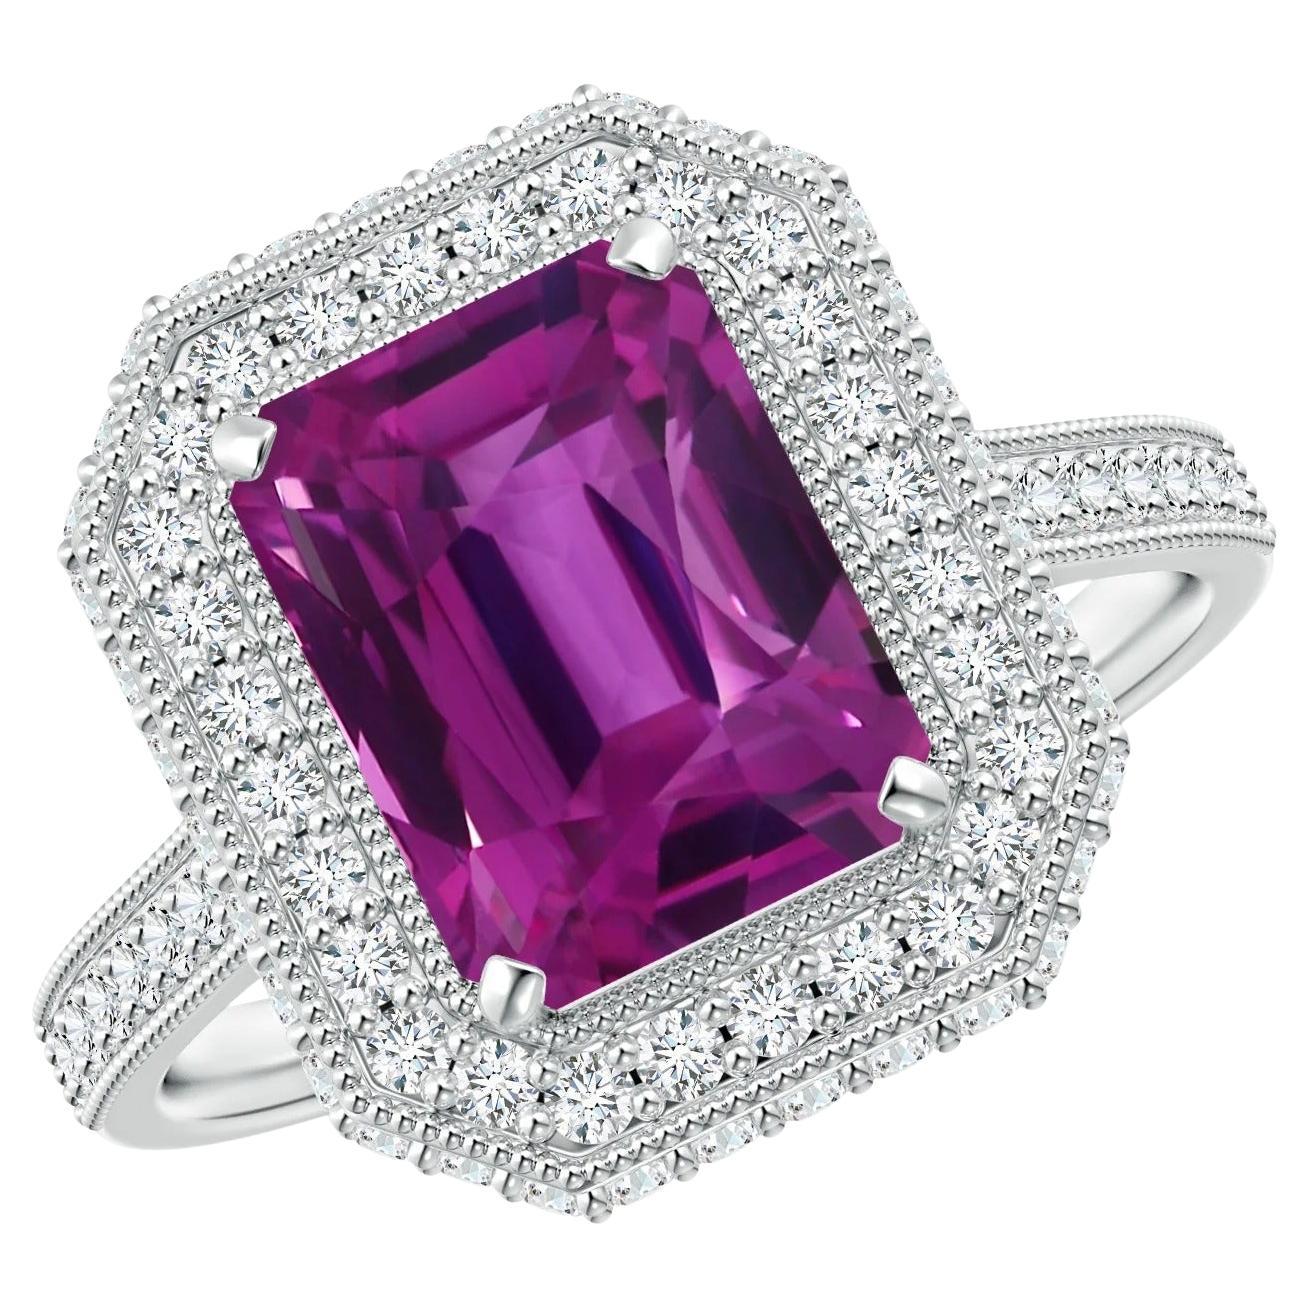 GIA Certified Natural Emerald Cut Pink Sapphire Halo Ring in White Gold